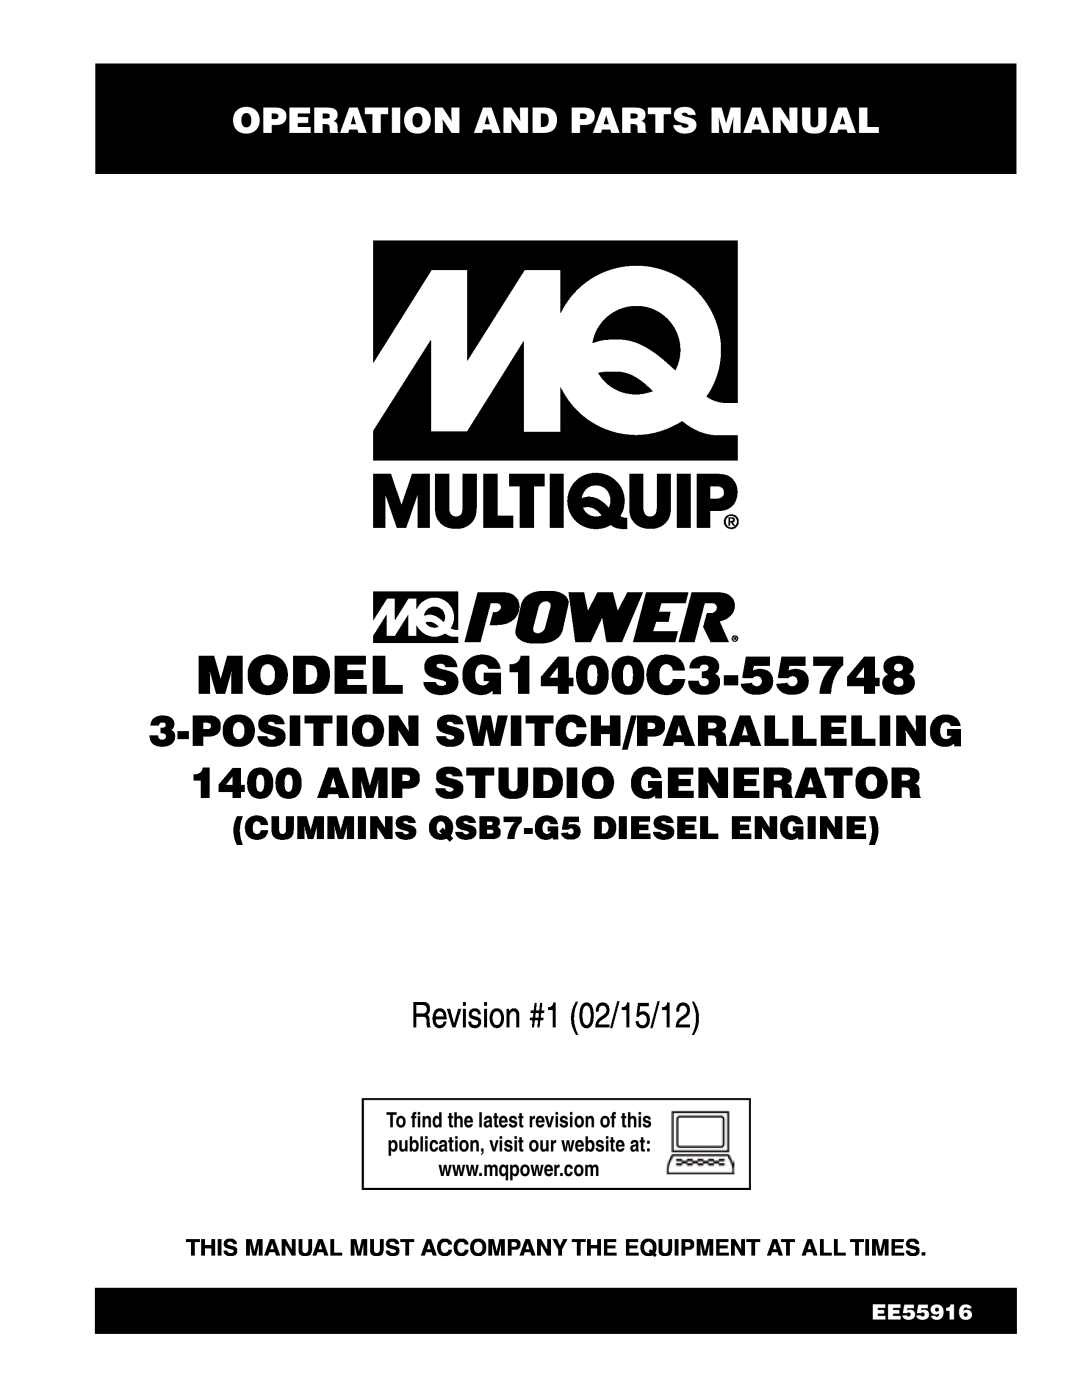 Multiquip SG1400C3-55748 manual Operation and parts Manual, This Manual Must Accompany The Equipment At All Times, EE55916 